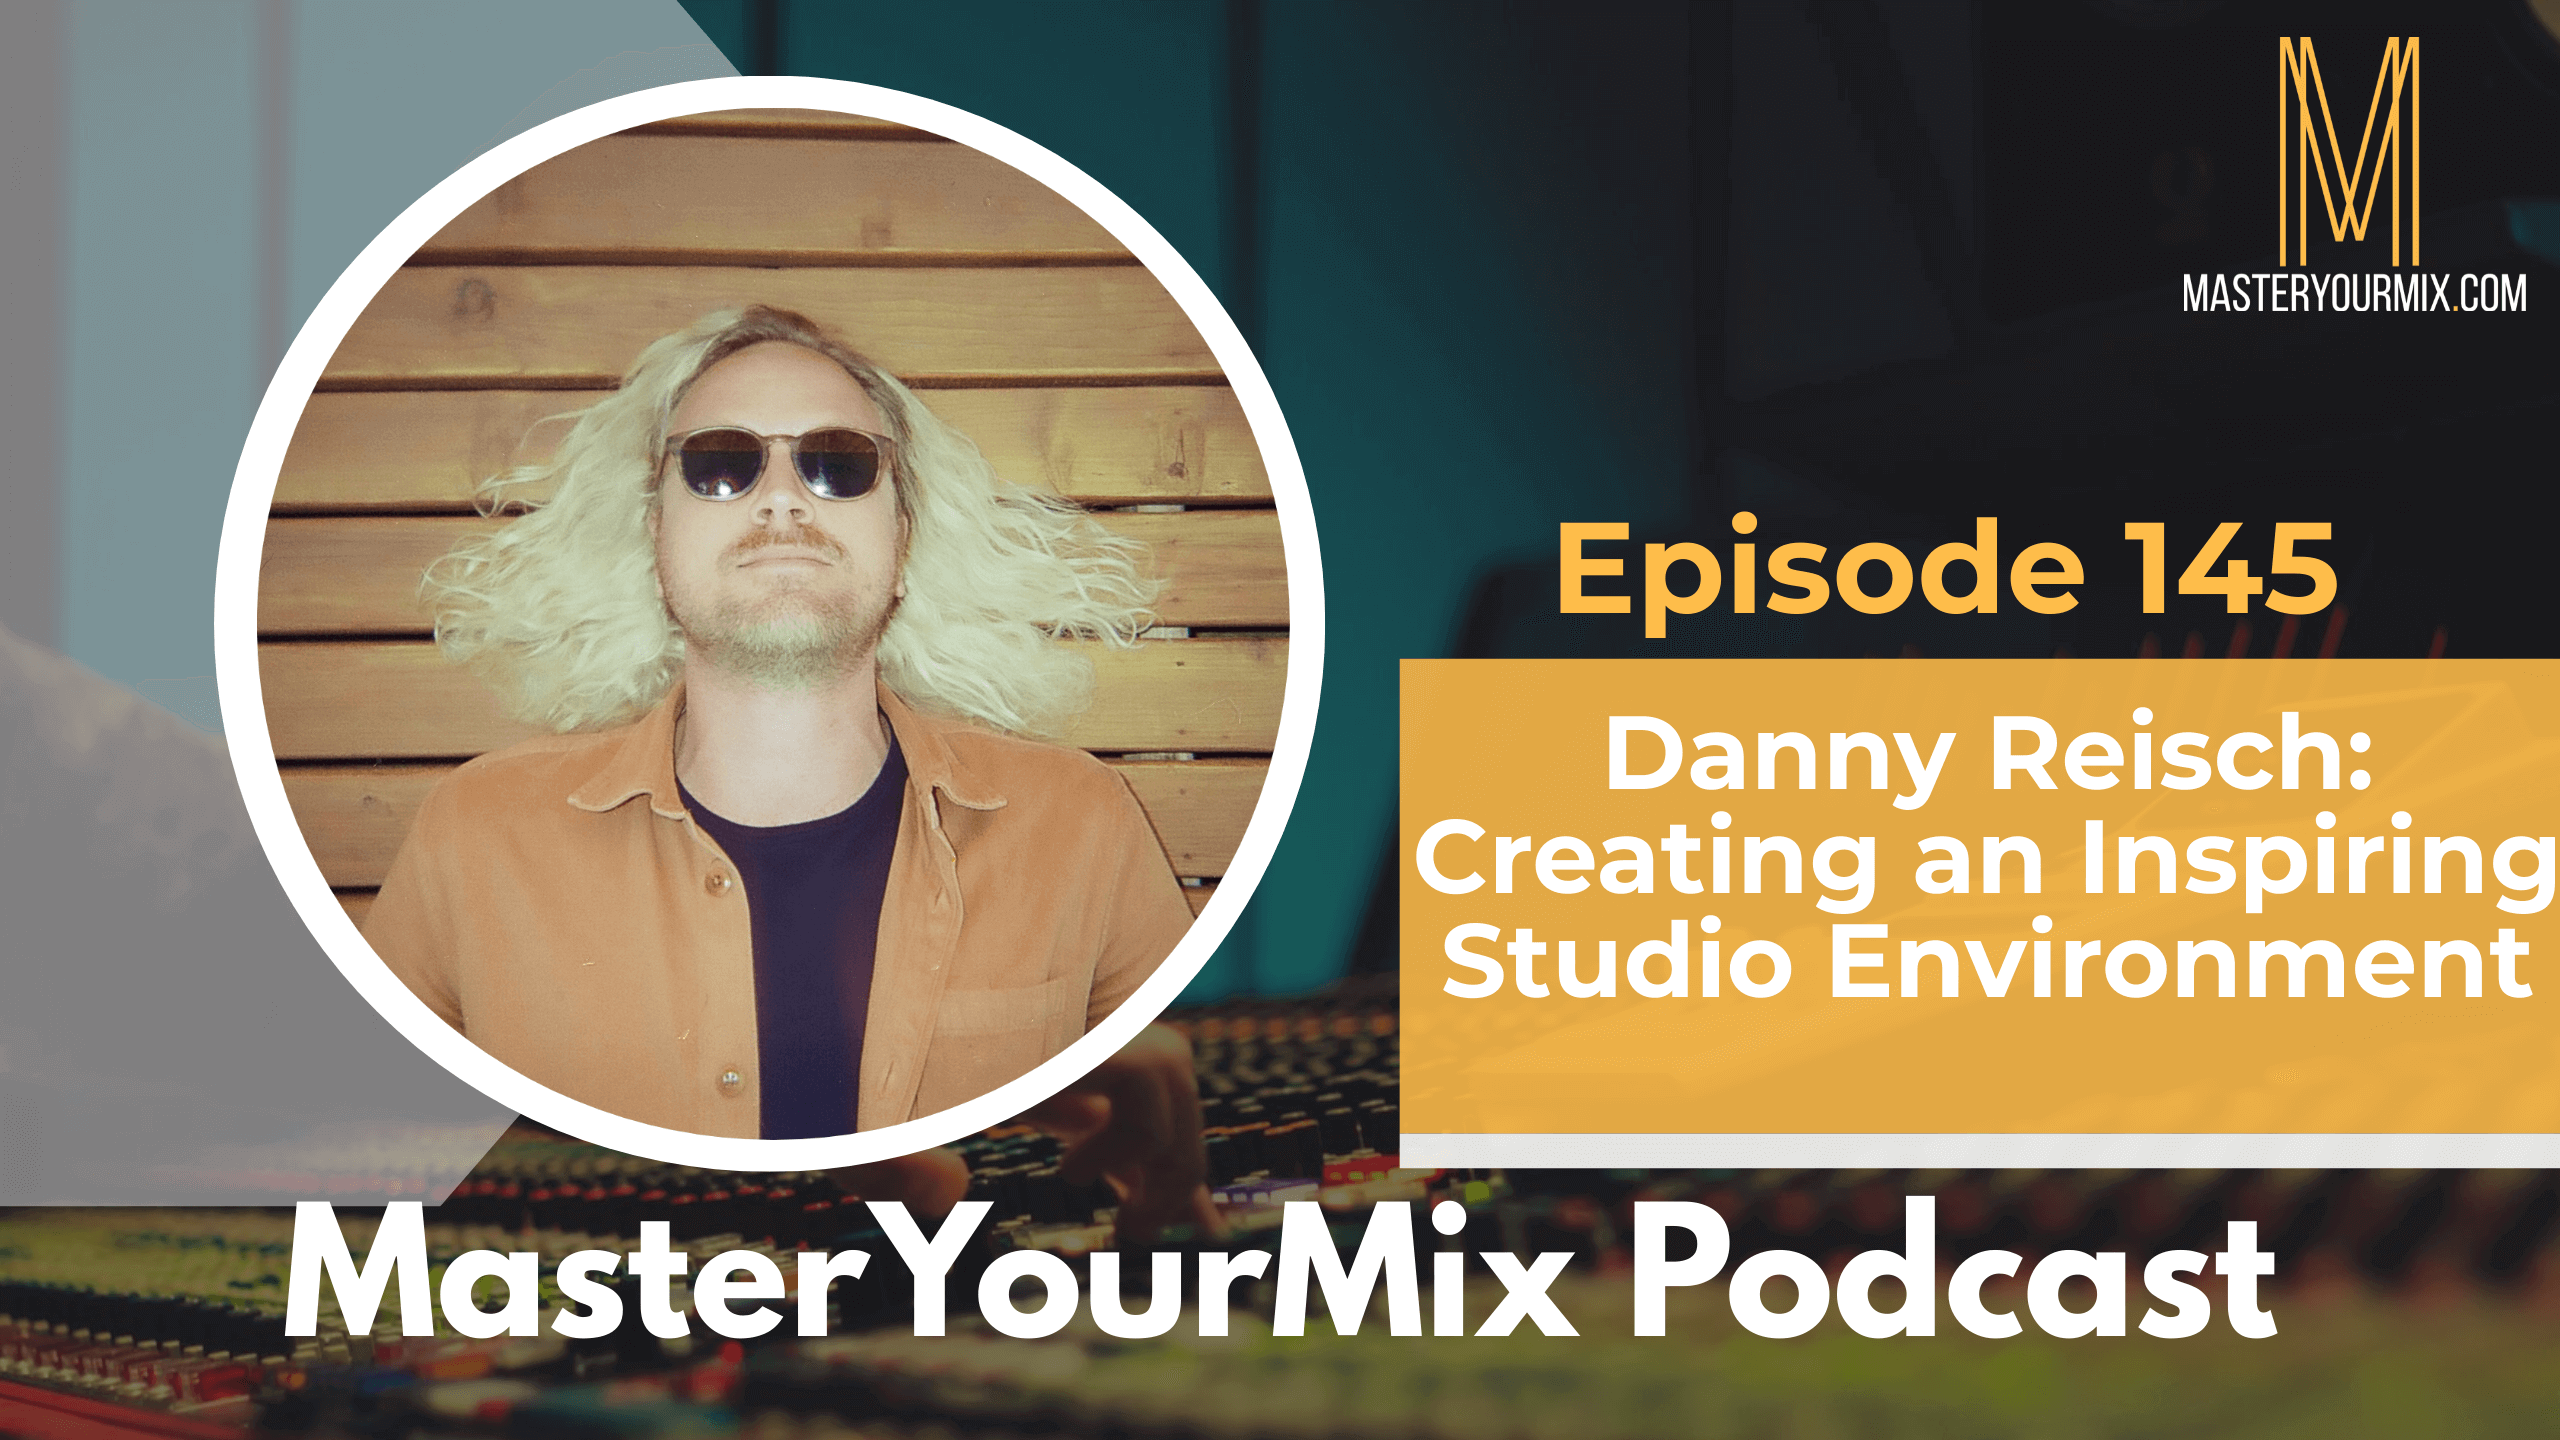 master your mix podcast, ep 145 danny reisch